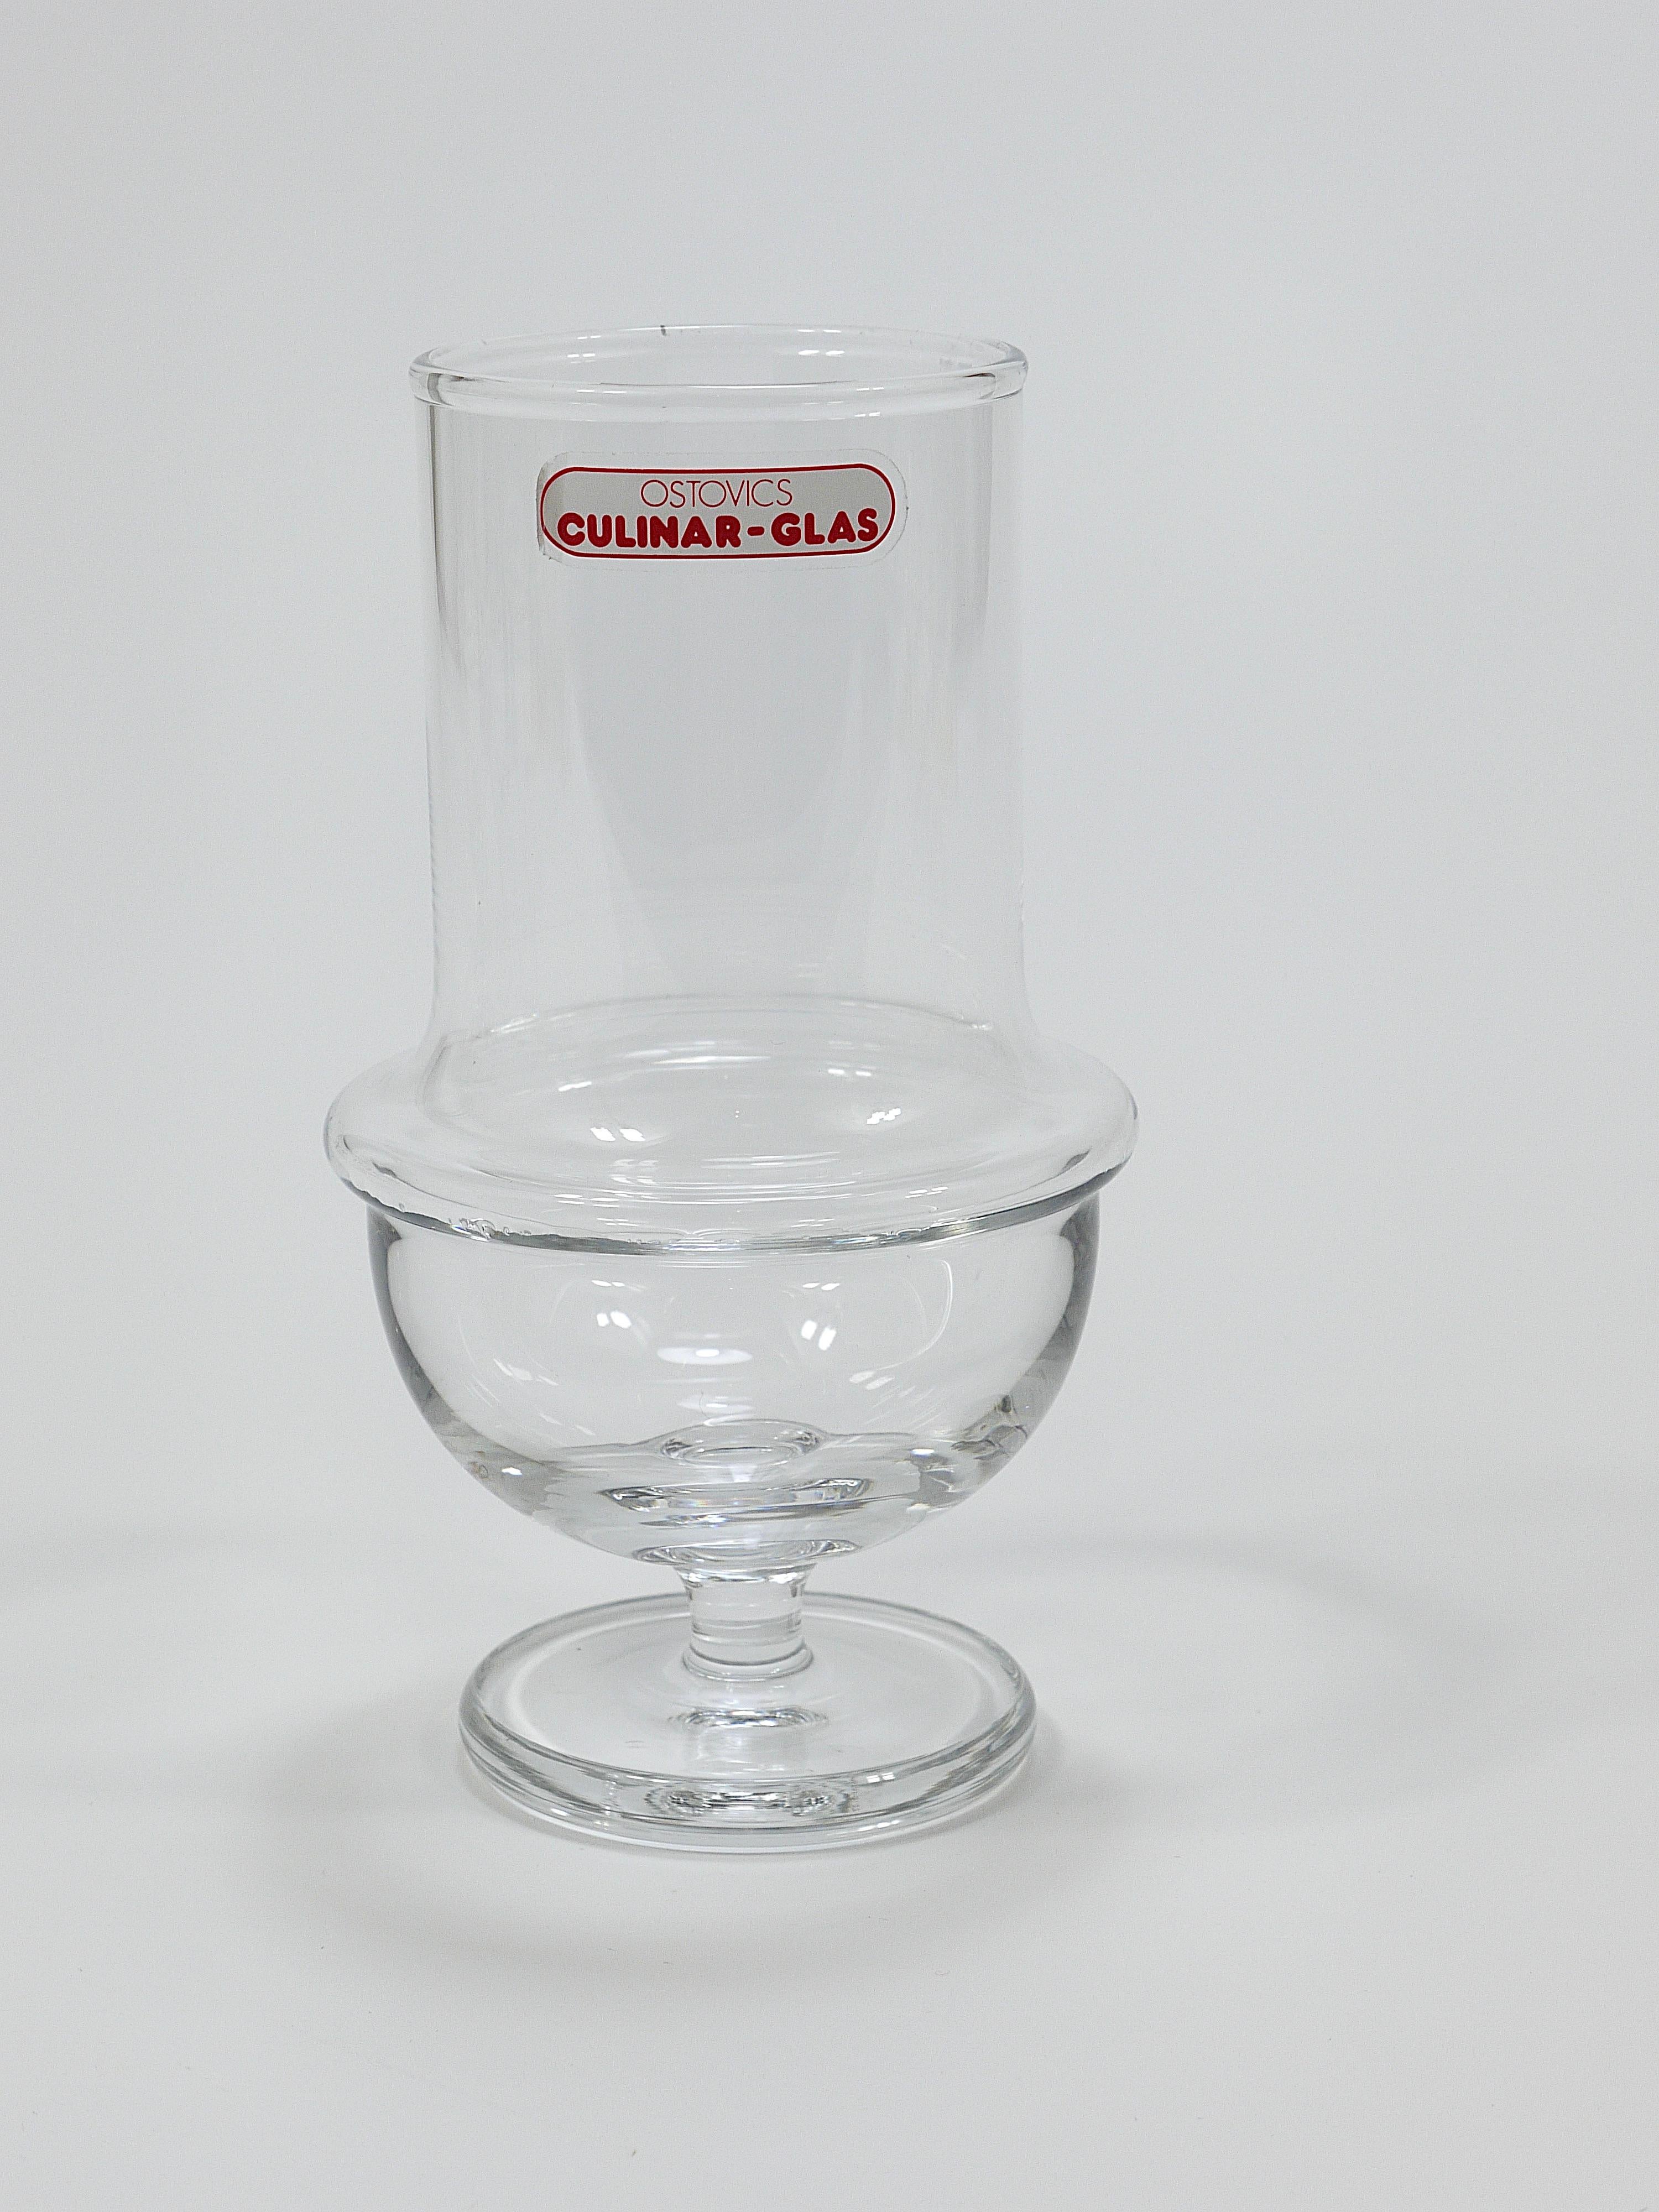 Six Carl Aubock Mid-Century Cocktail Glasses by Ostovics Culinar, Austria, 1970s For Sale 3